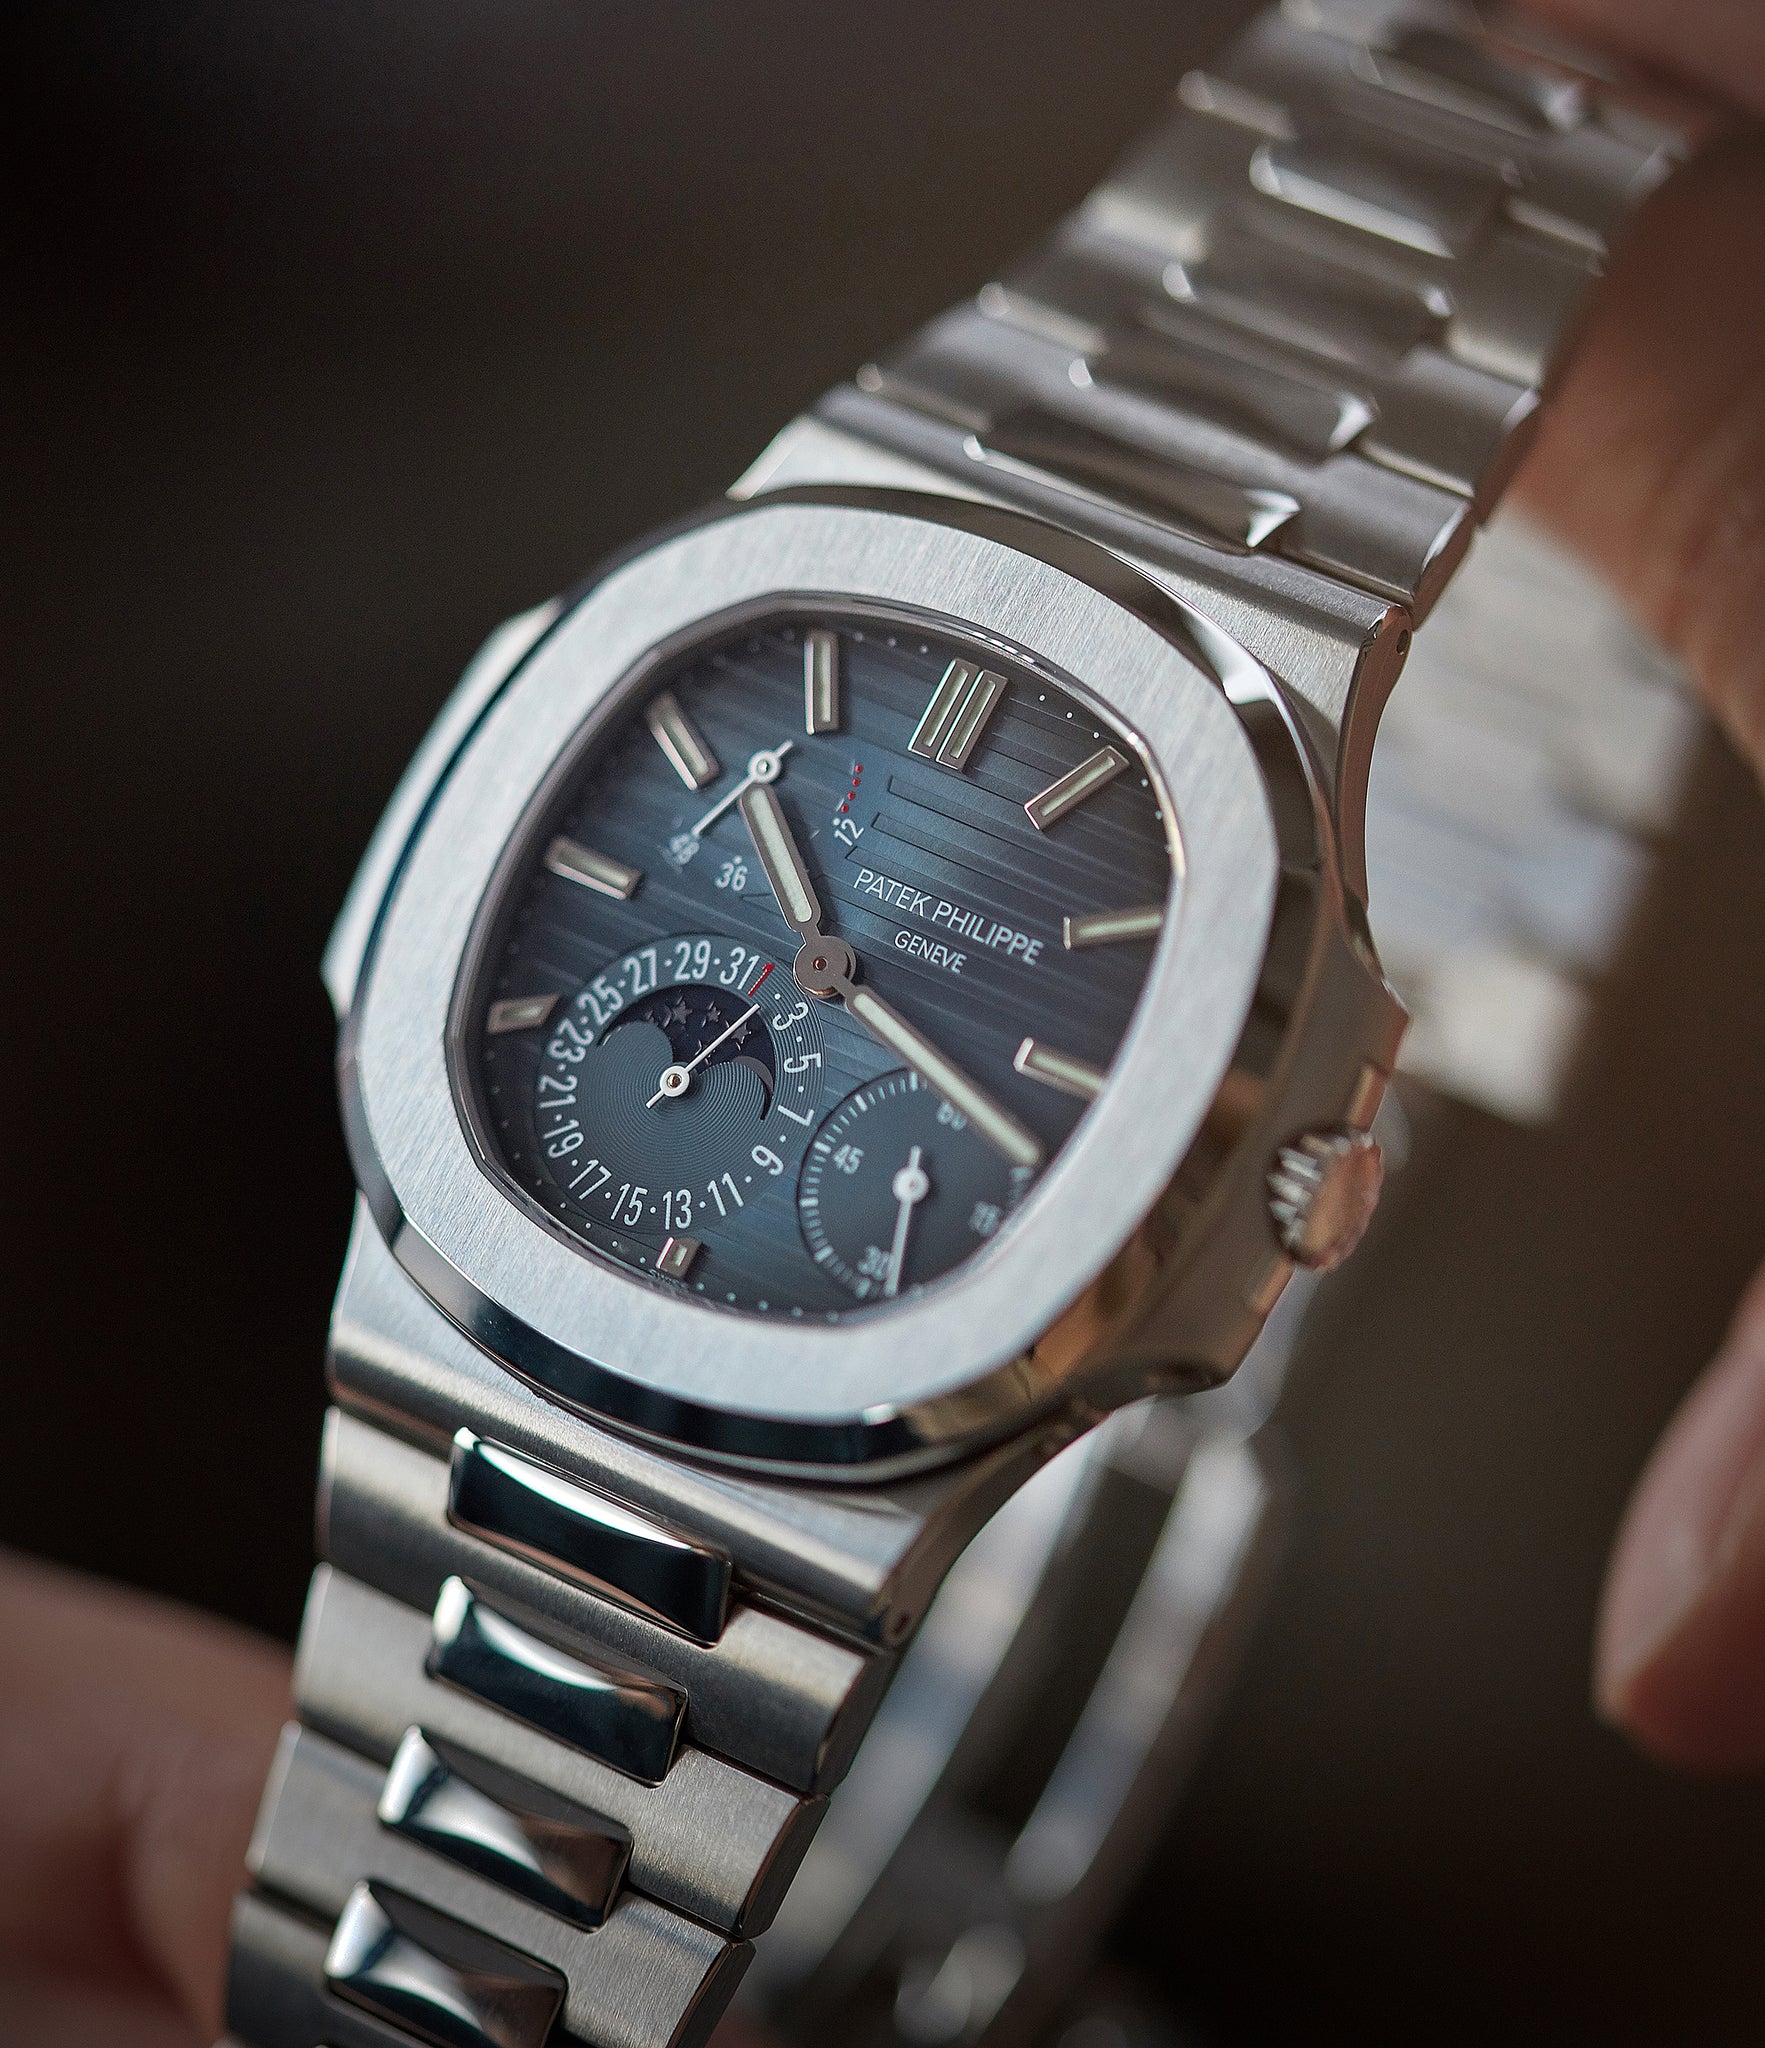 5712 Patek Philippe Nautilus Moon Phase steel pre-owned watch for sale online at A Collected Man London UK specialist of rare watches